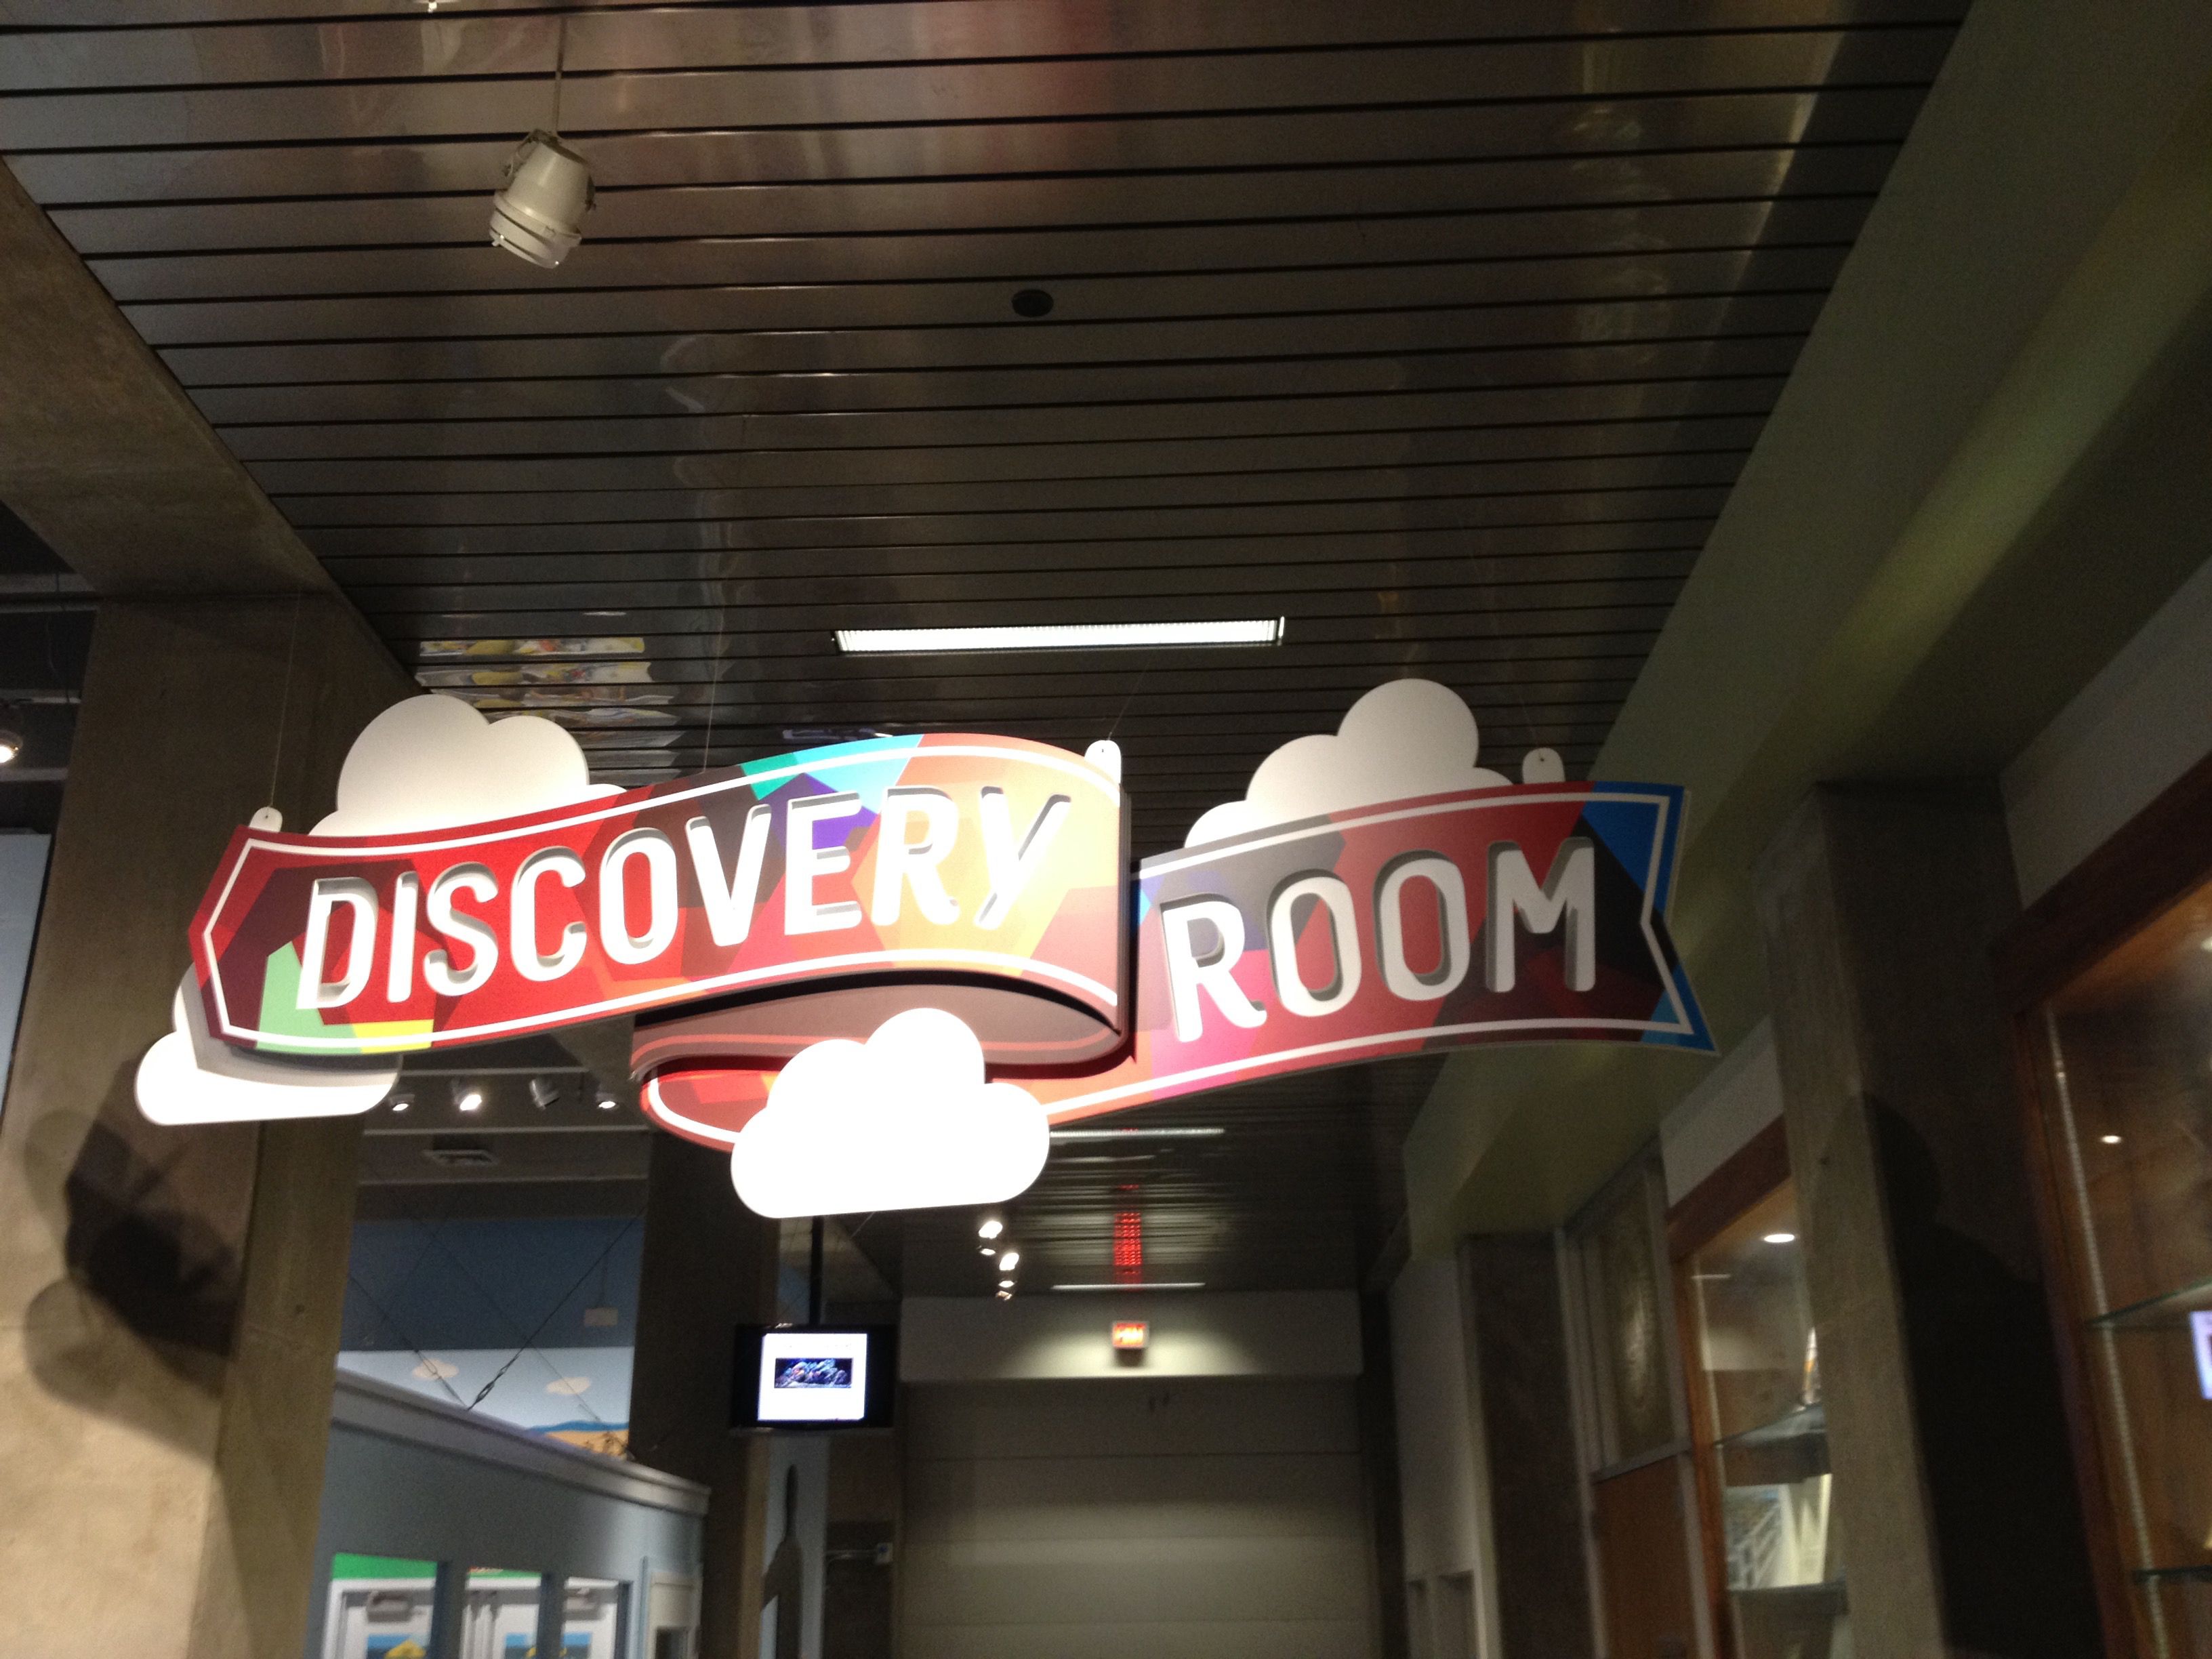 Discovery Room at the St. Louis Science Center